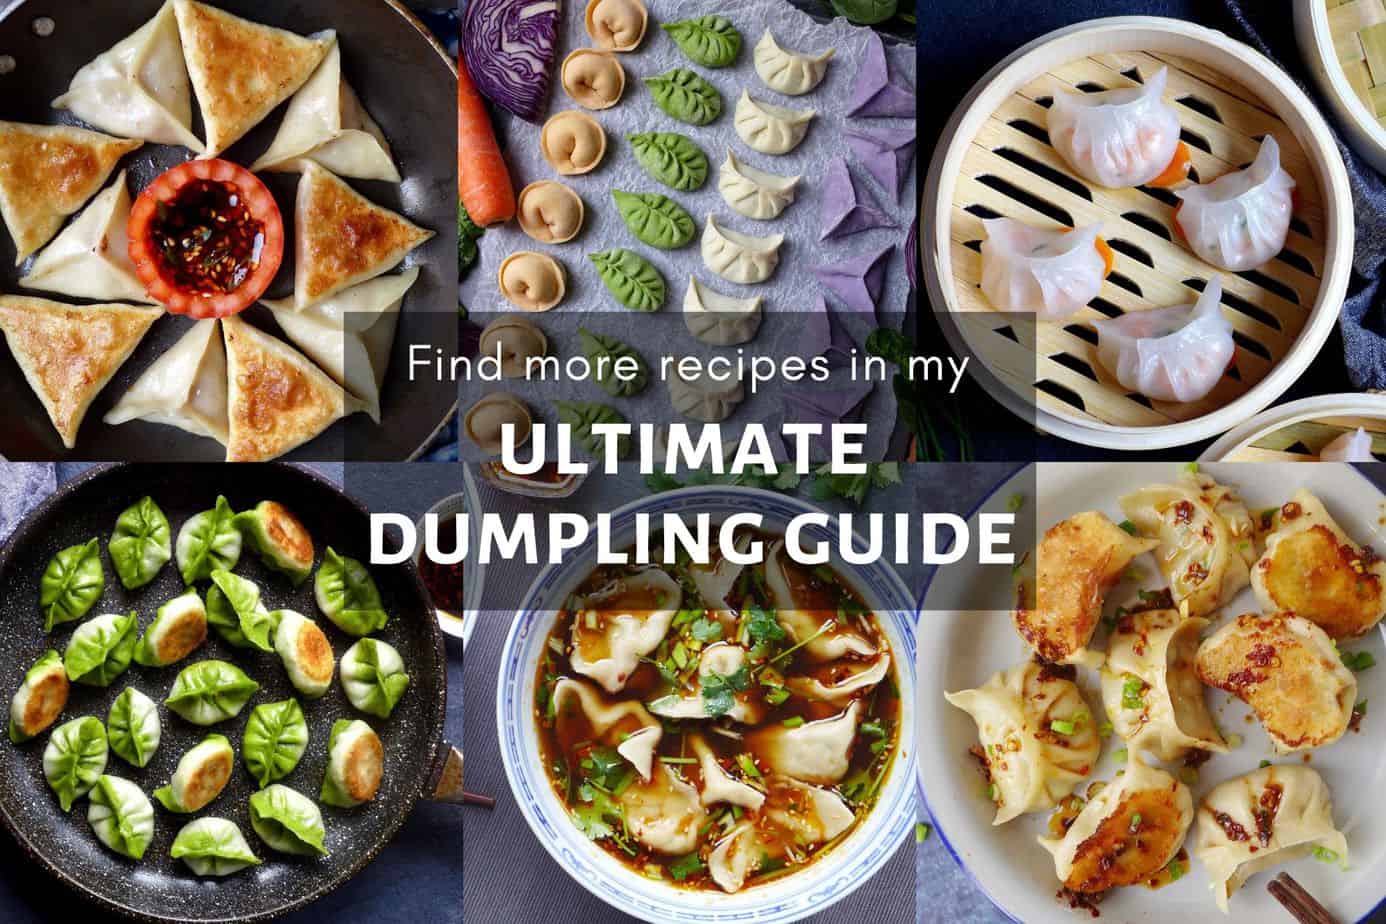 A collection of dumpling dishes cooked in different ways